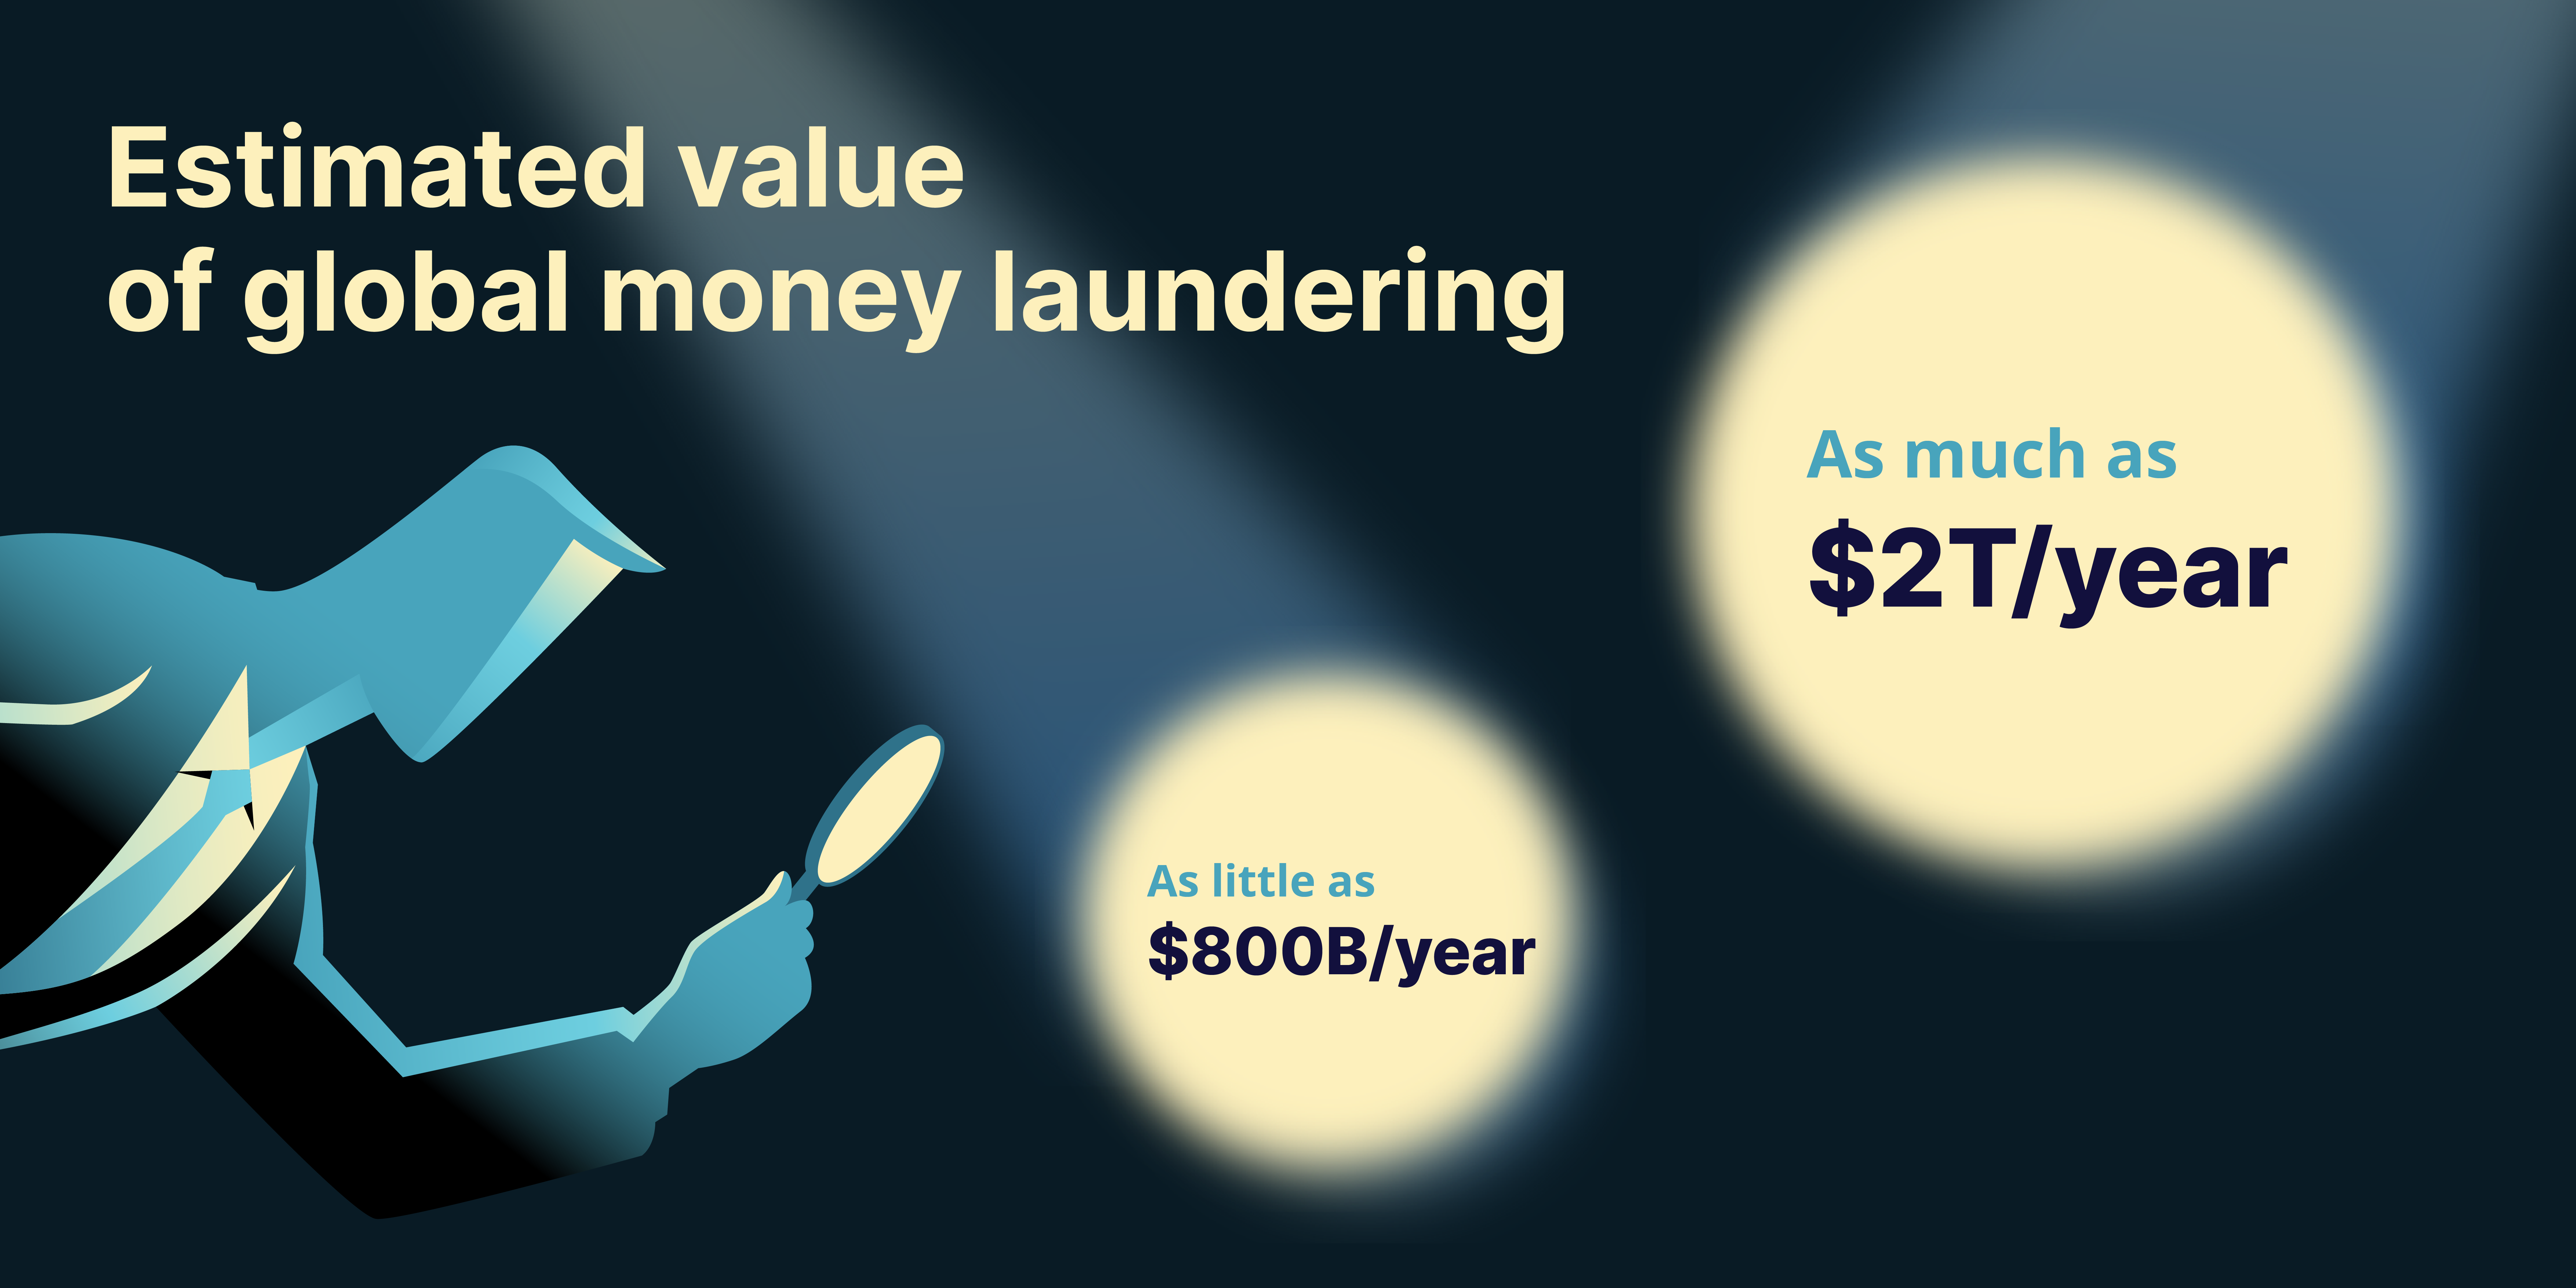 Value of global money laundering and how how machine learning can help banks upgrade from ineffective AML programs to fight financial crime more effectively.